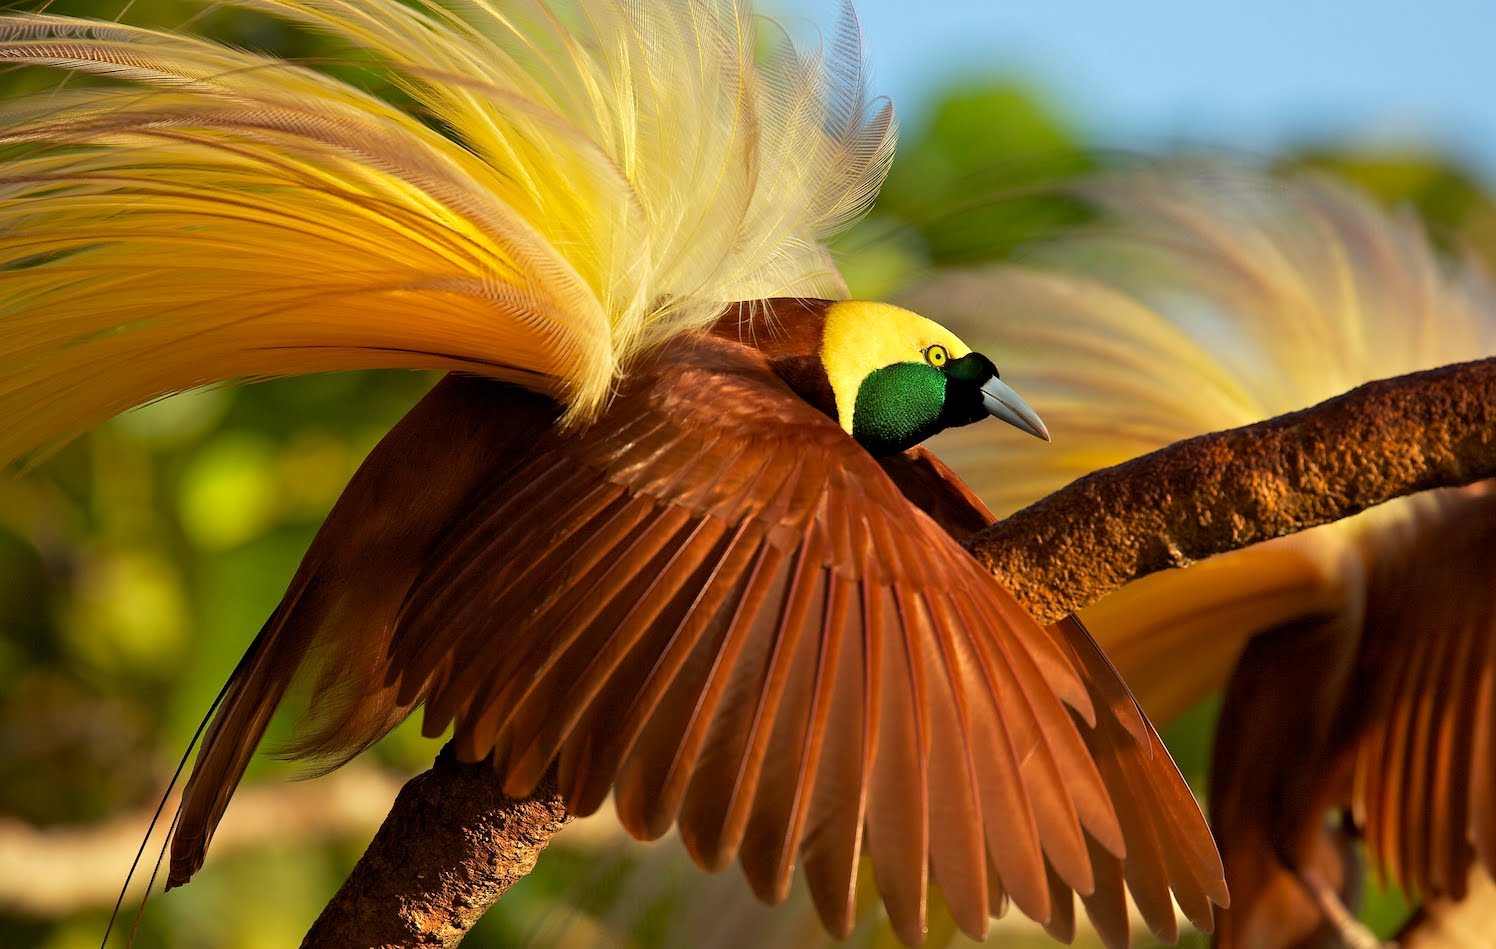 Greater Bird of Paradise Wallpaper   HD Wallpapers